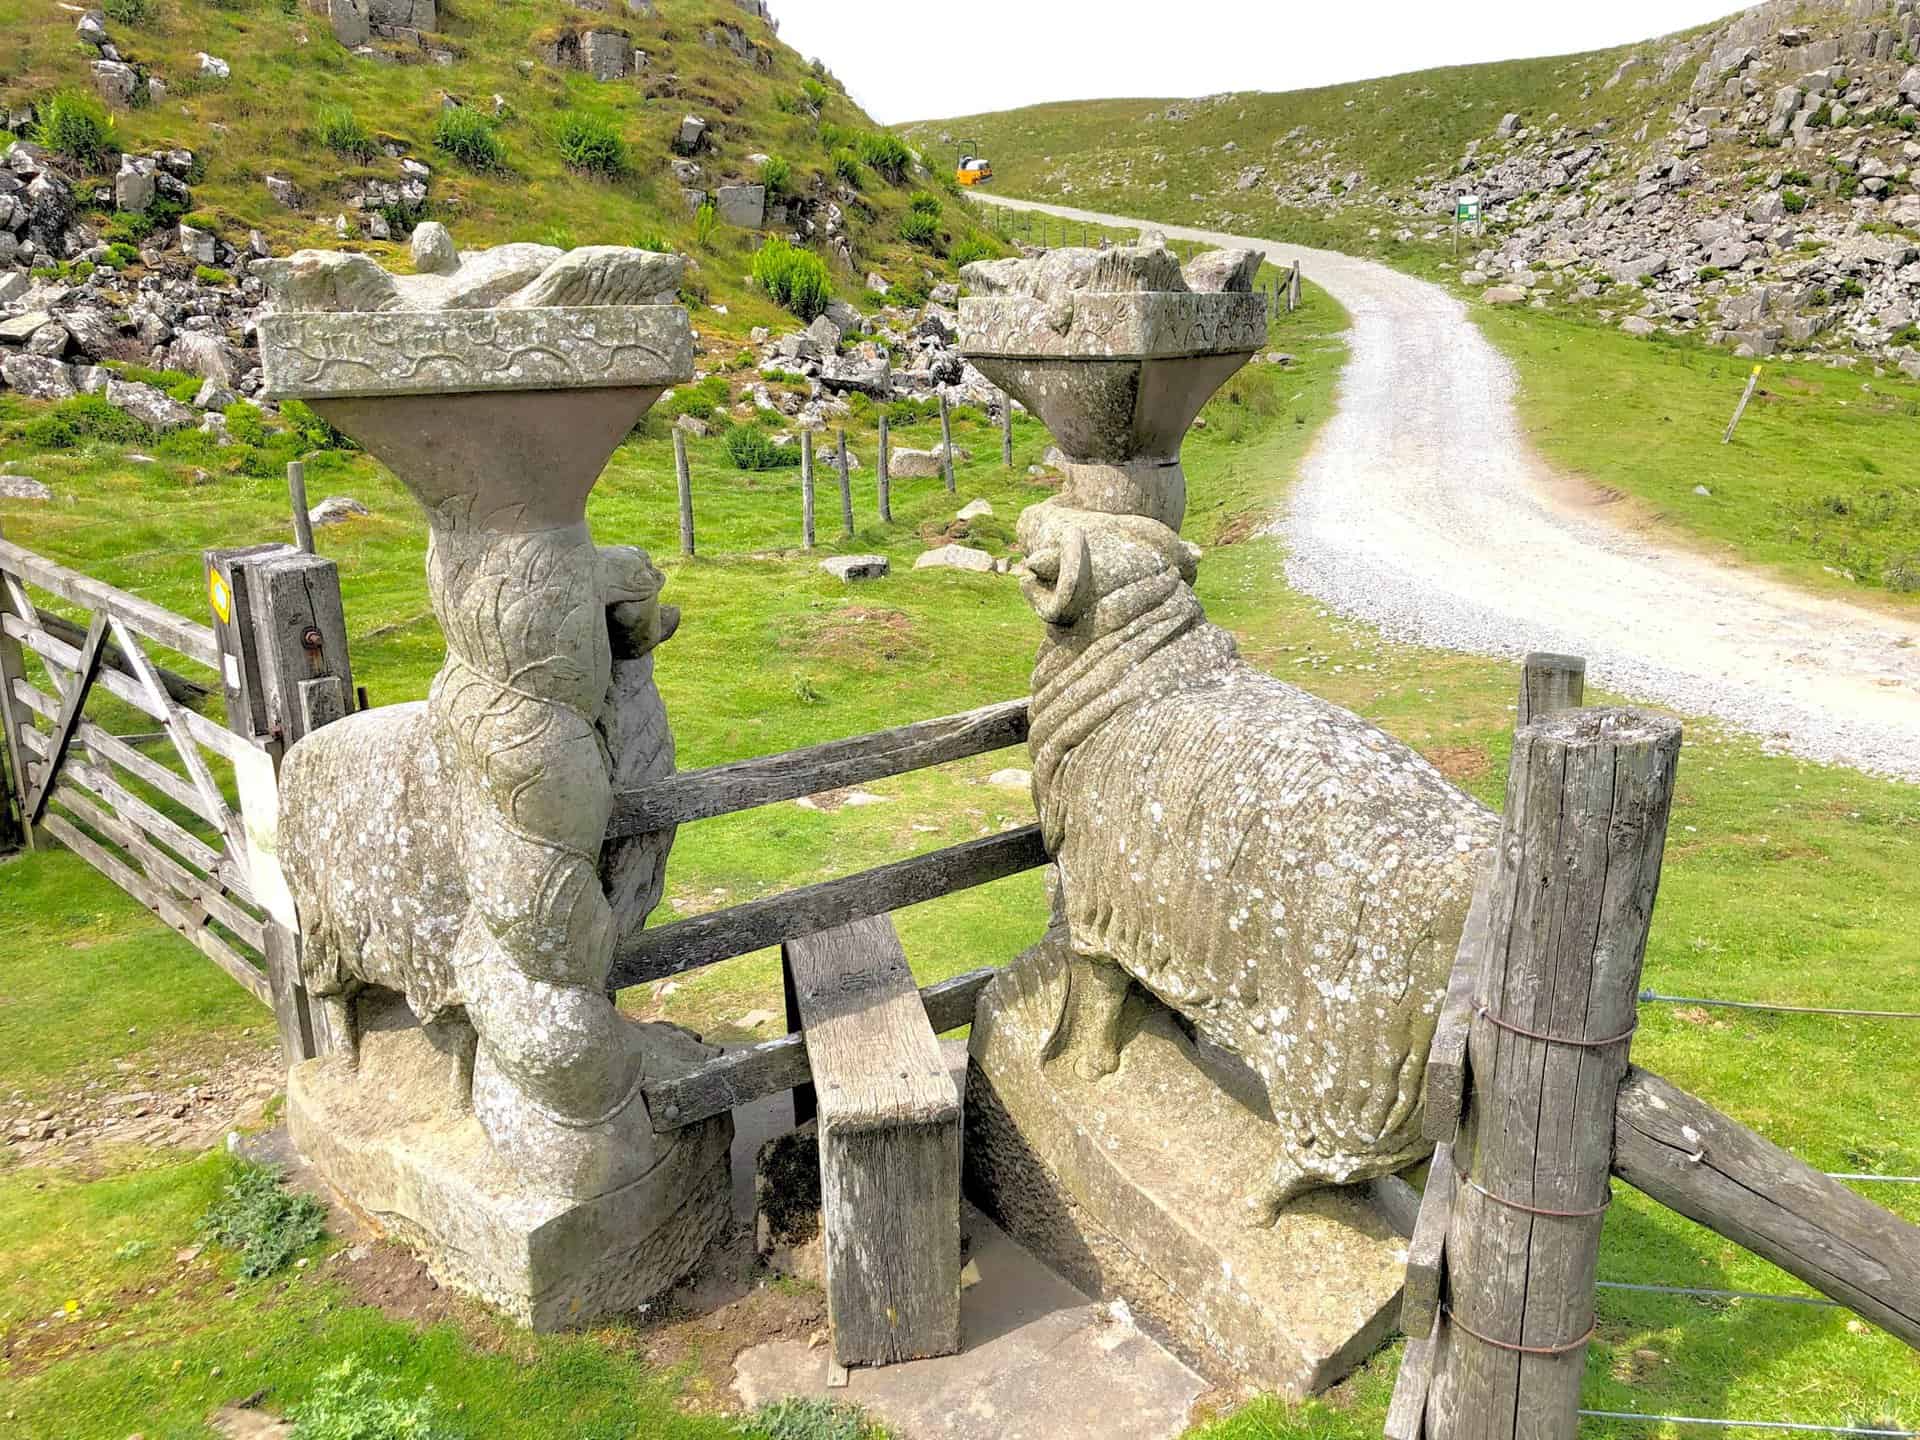 Intricately crafted stone sheep flank a stile near Holwick Scars, blending art with the natural landscape.